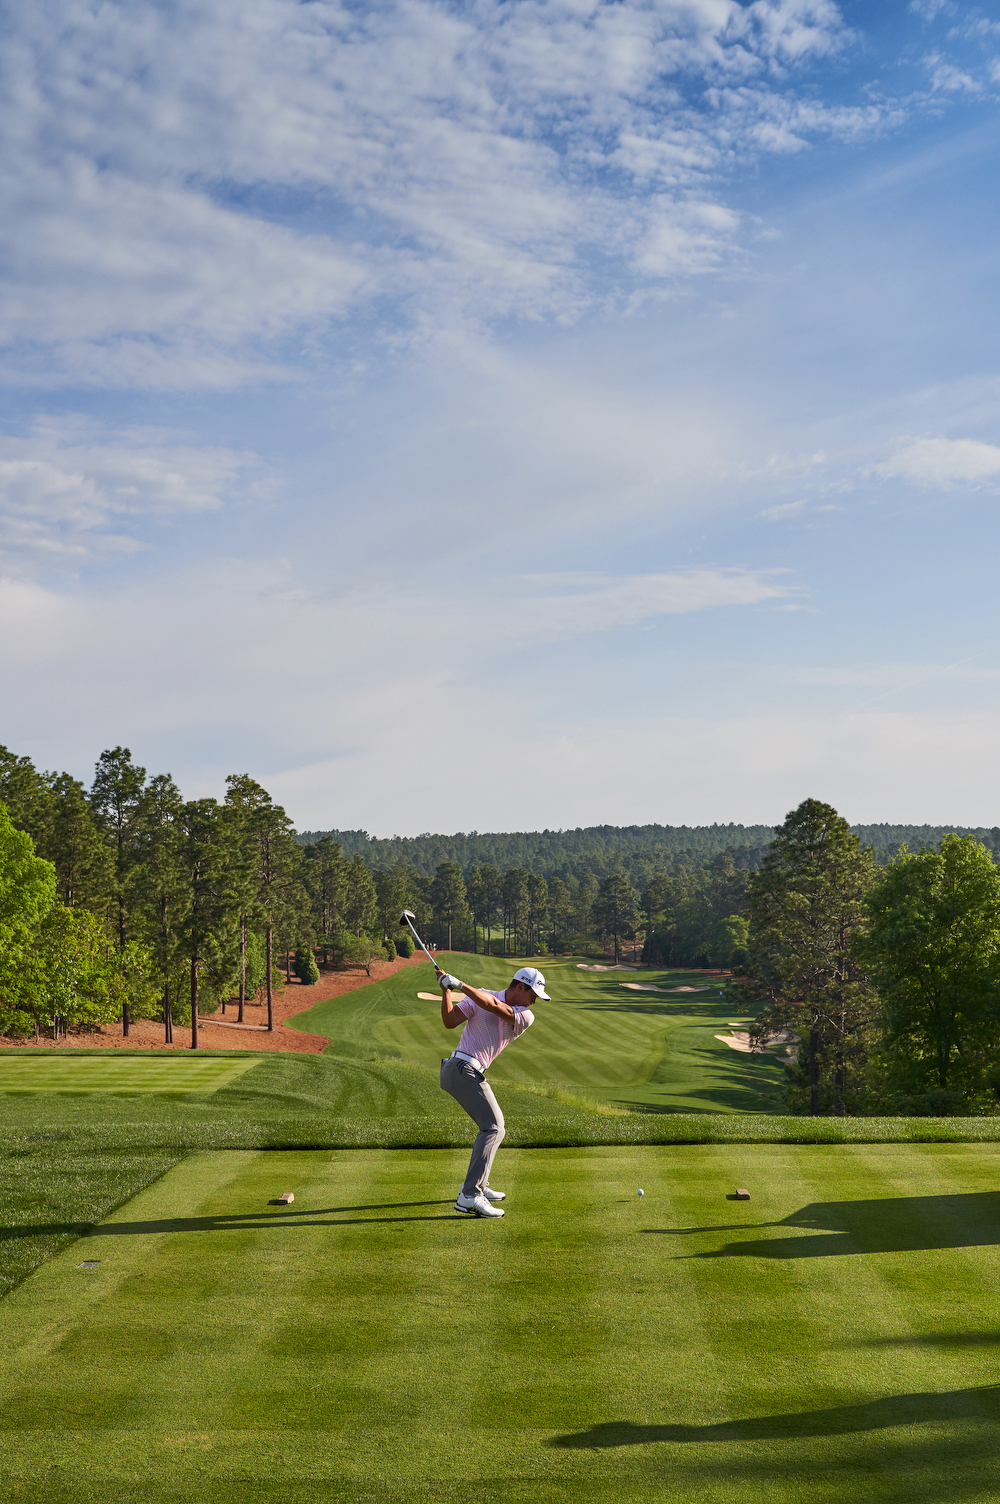 A course that reflects the beauty and natural splendor of the South.